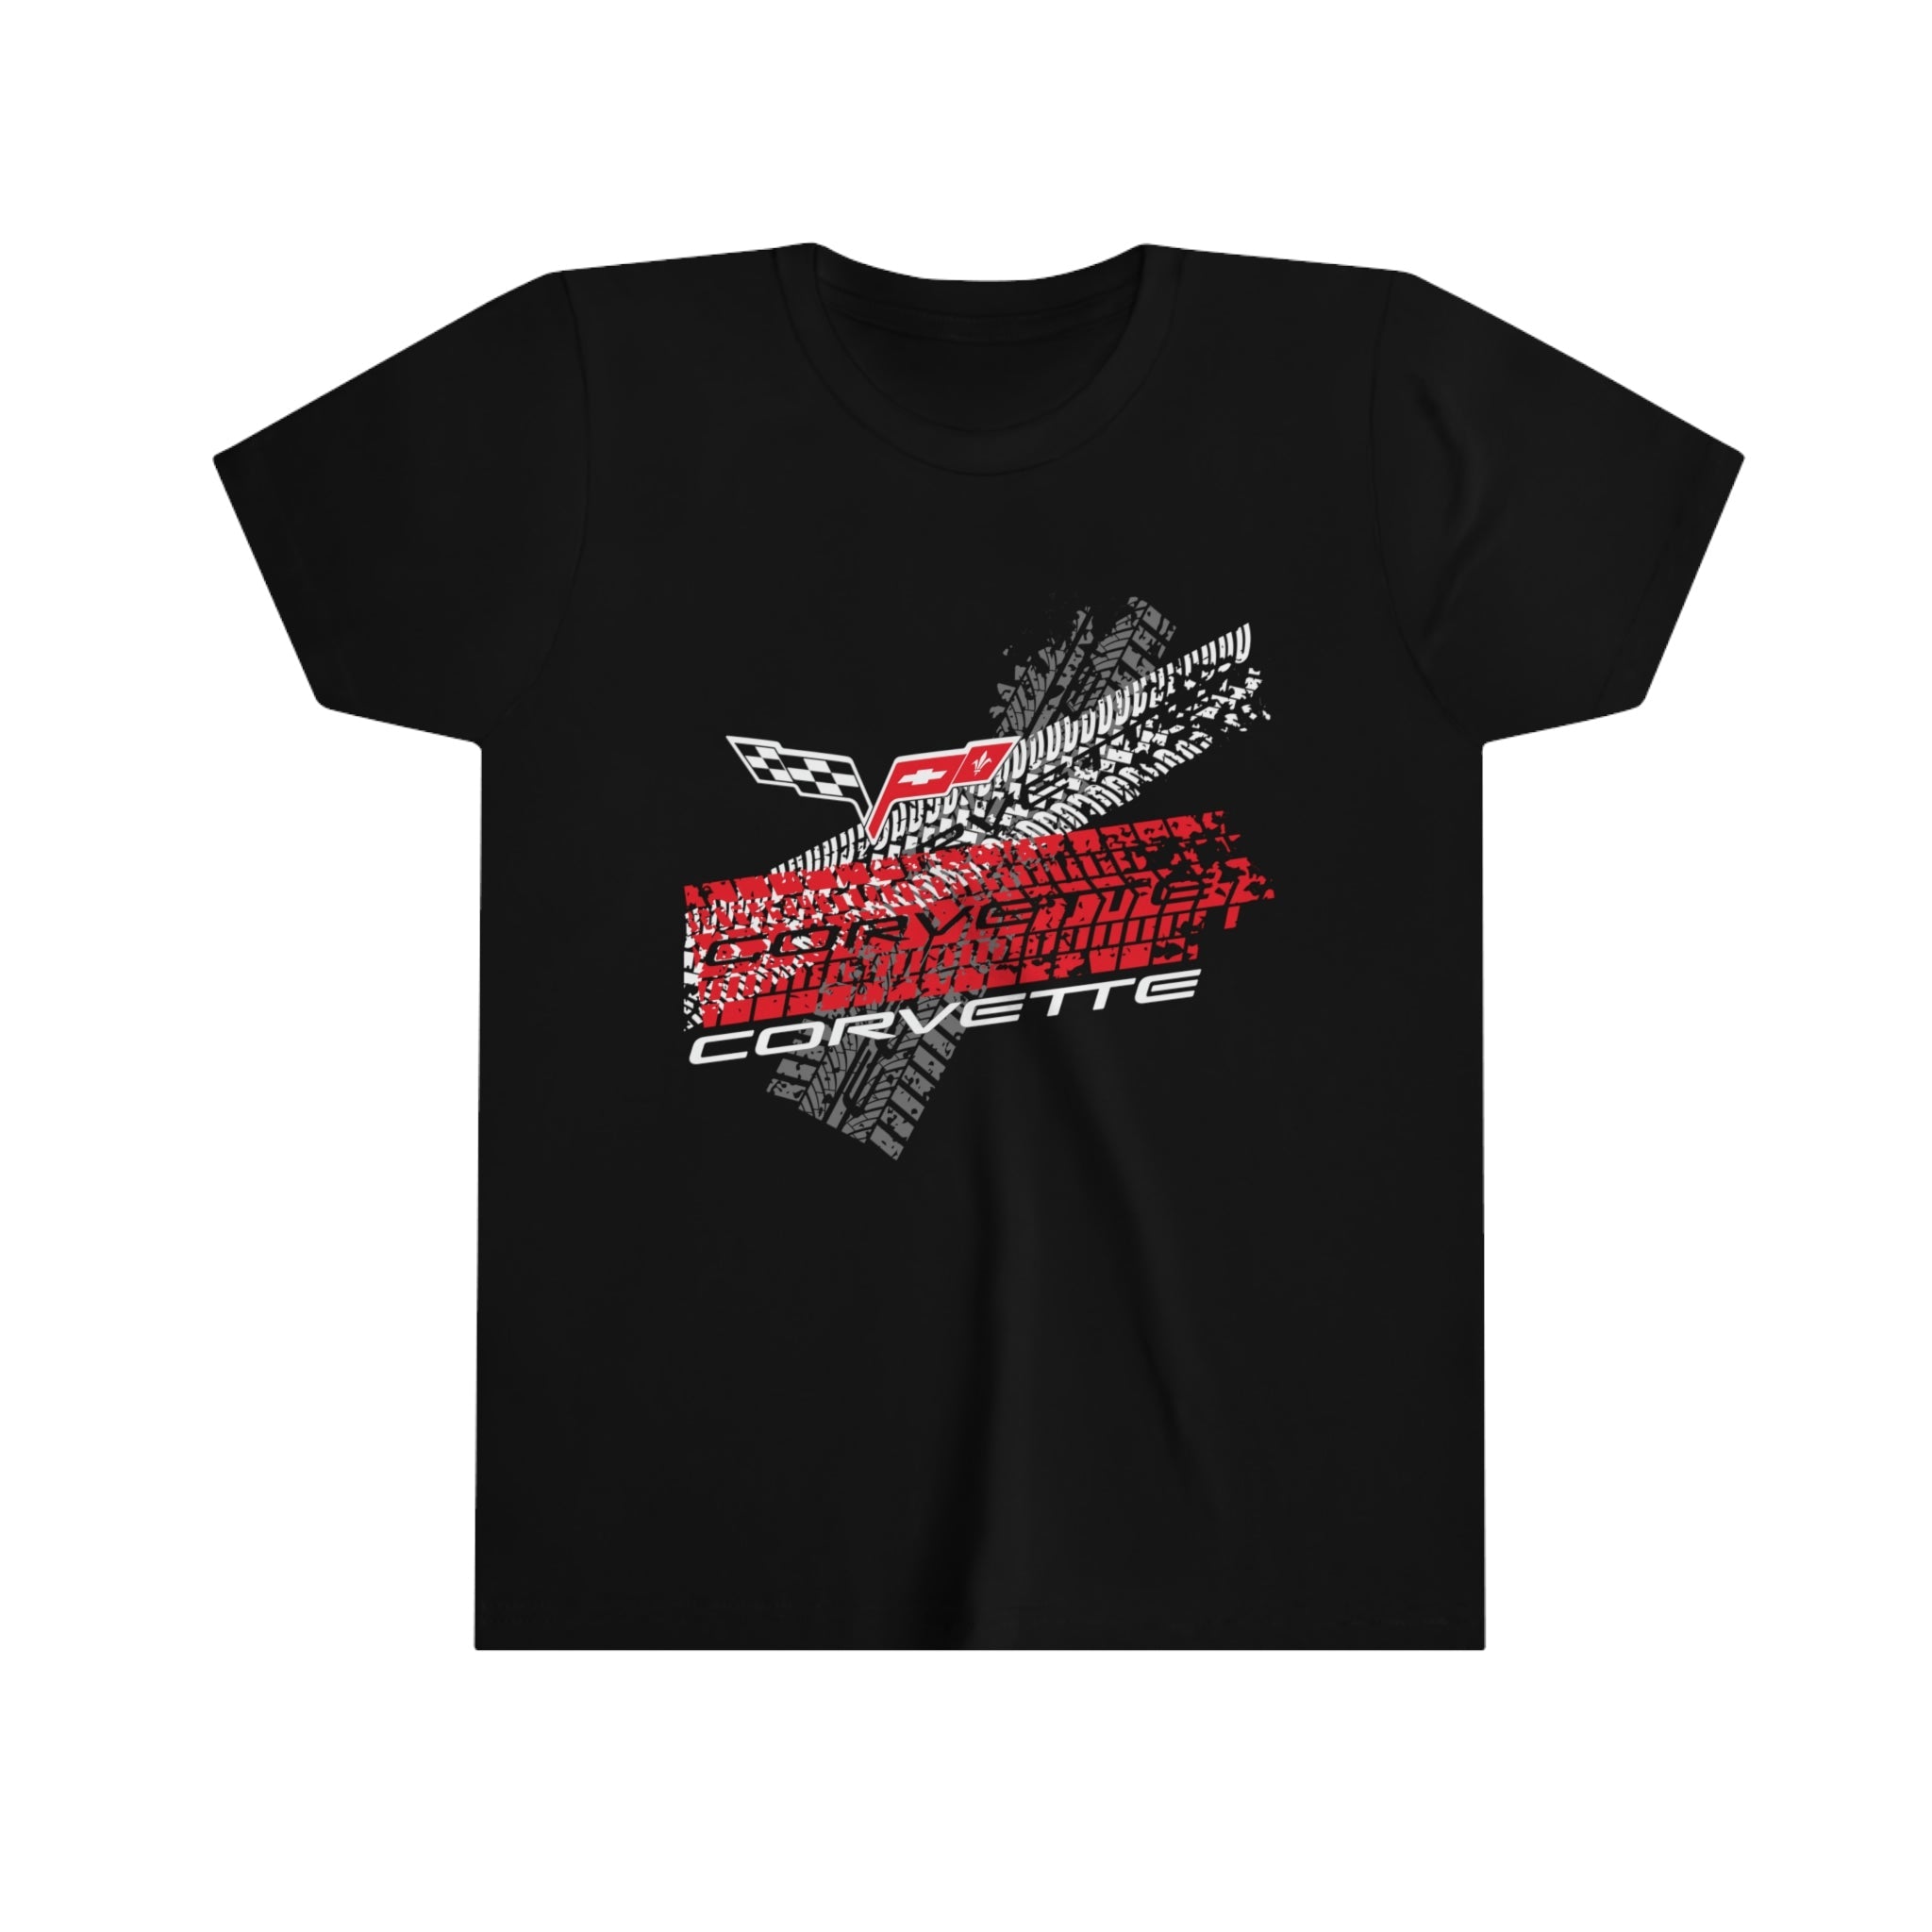 c6-corvette-tire-tracks-youth-short-sleeve-100-cotton-tee-perfect-for-any-occasion-or-activity